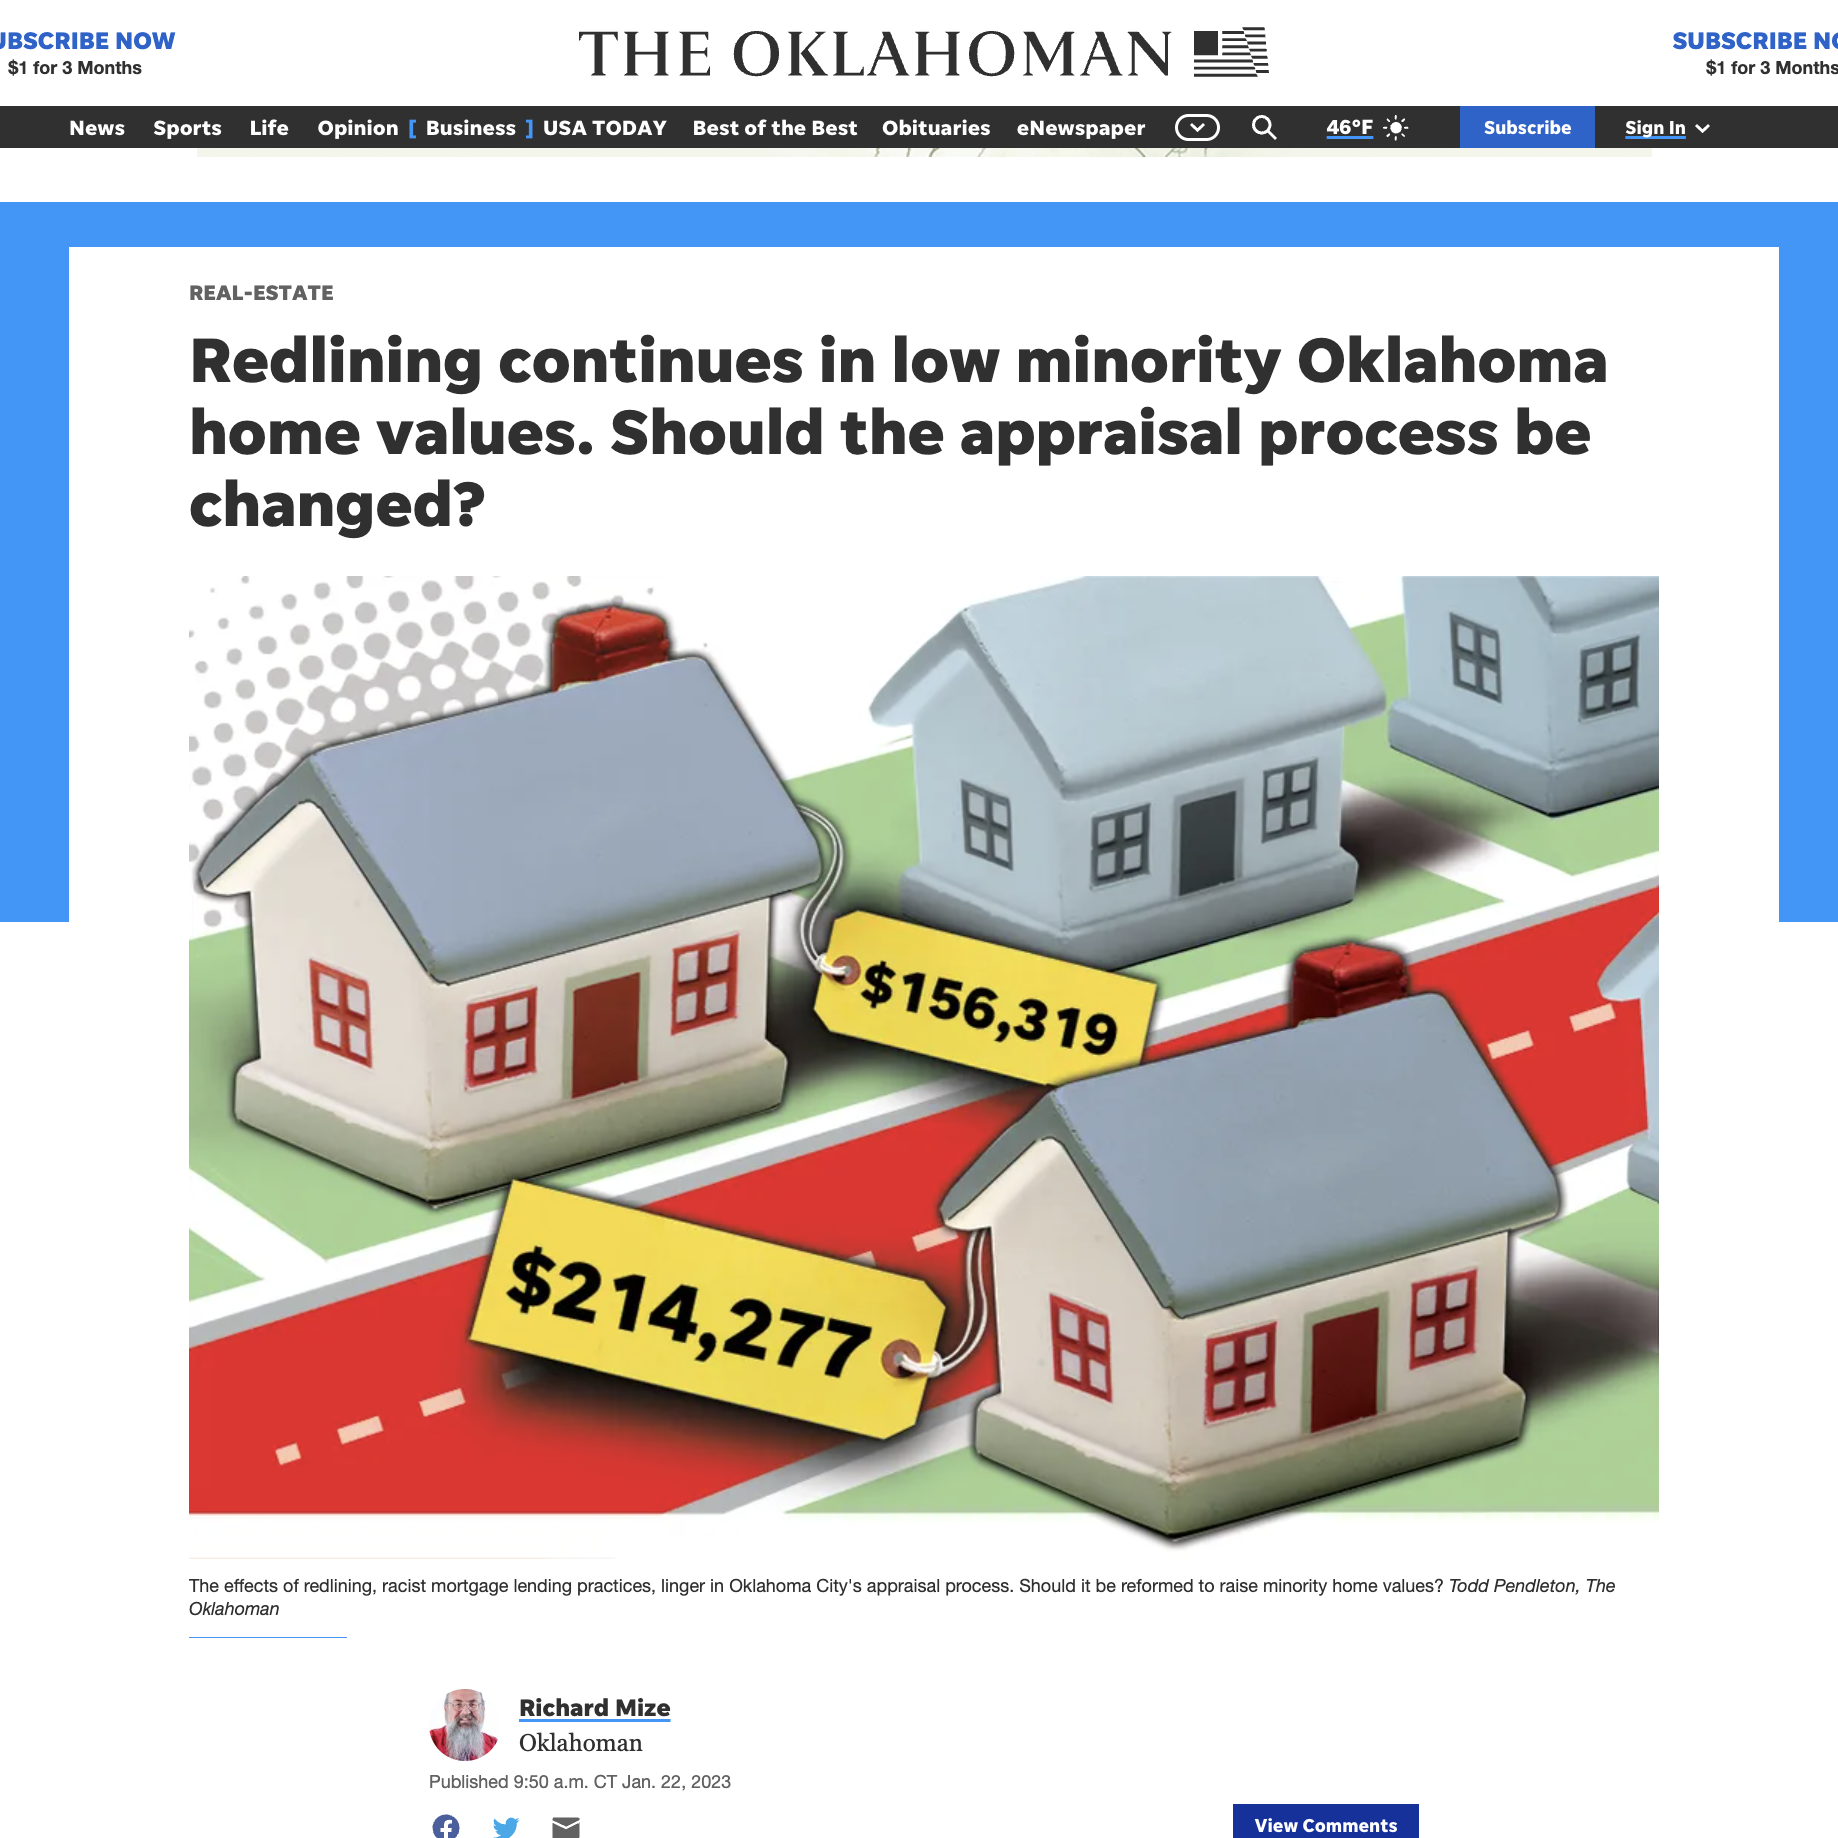 Redlining continues in low minority Oklahoma home values. Should the appraisal process be changed?